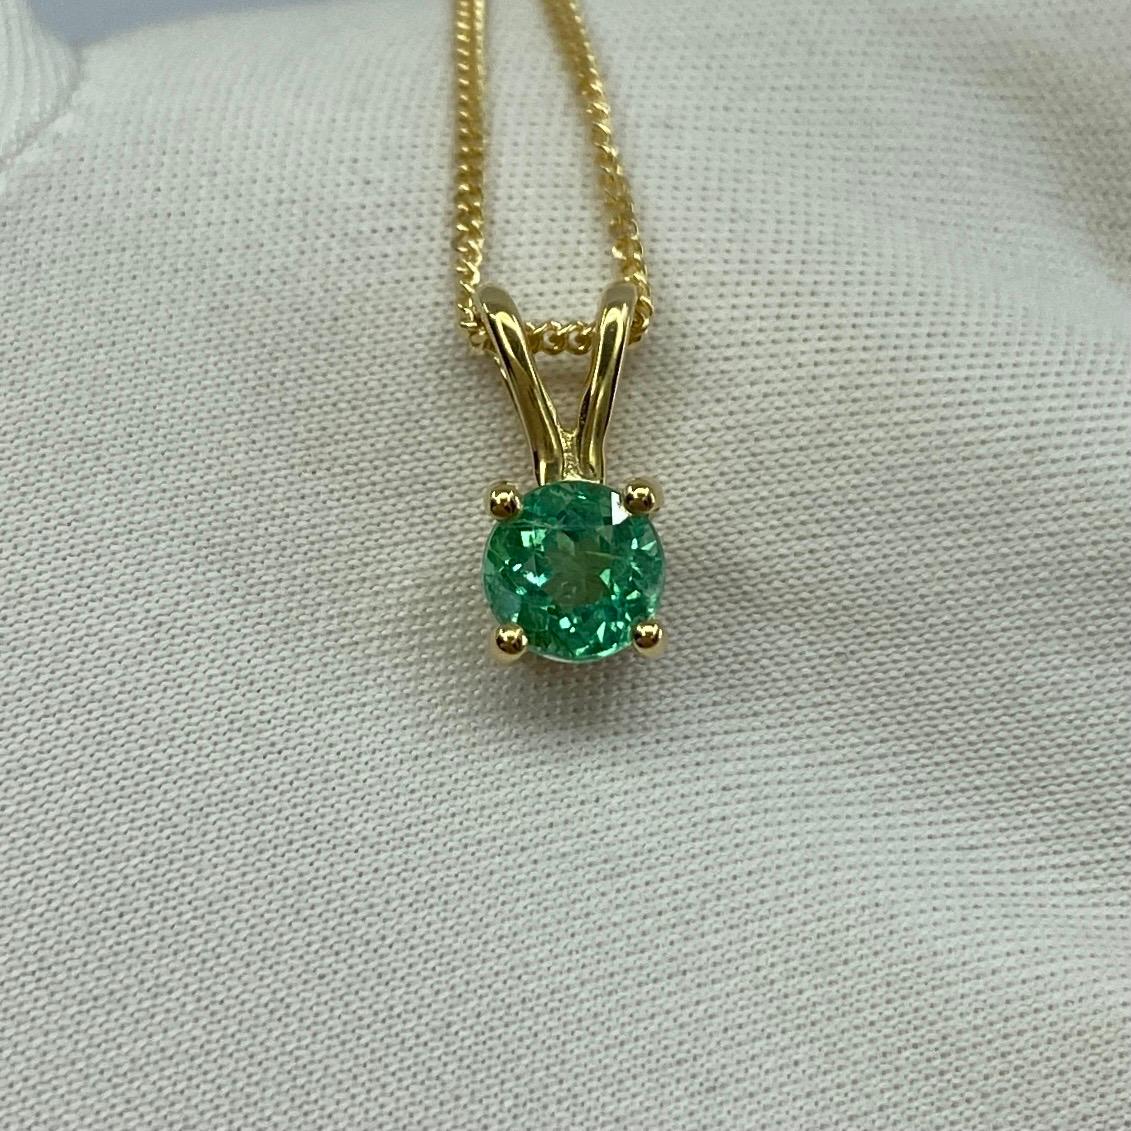 Vivid Green Colombian Emerald Round Cut 18k Yellow Gold Solitaire Pendant 7